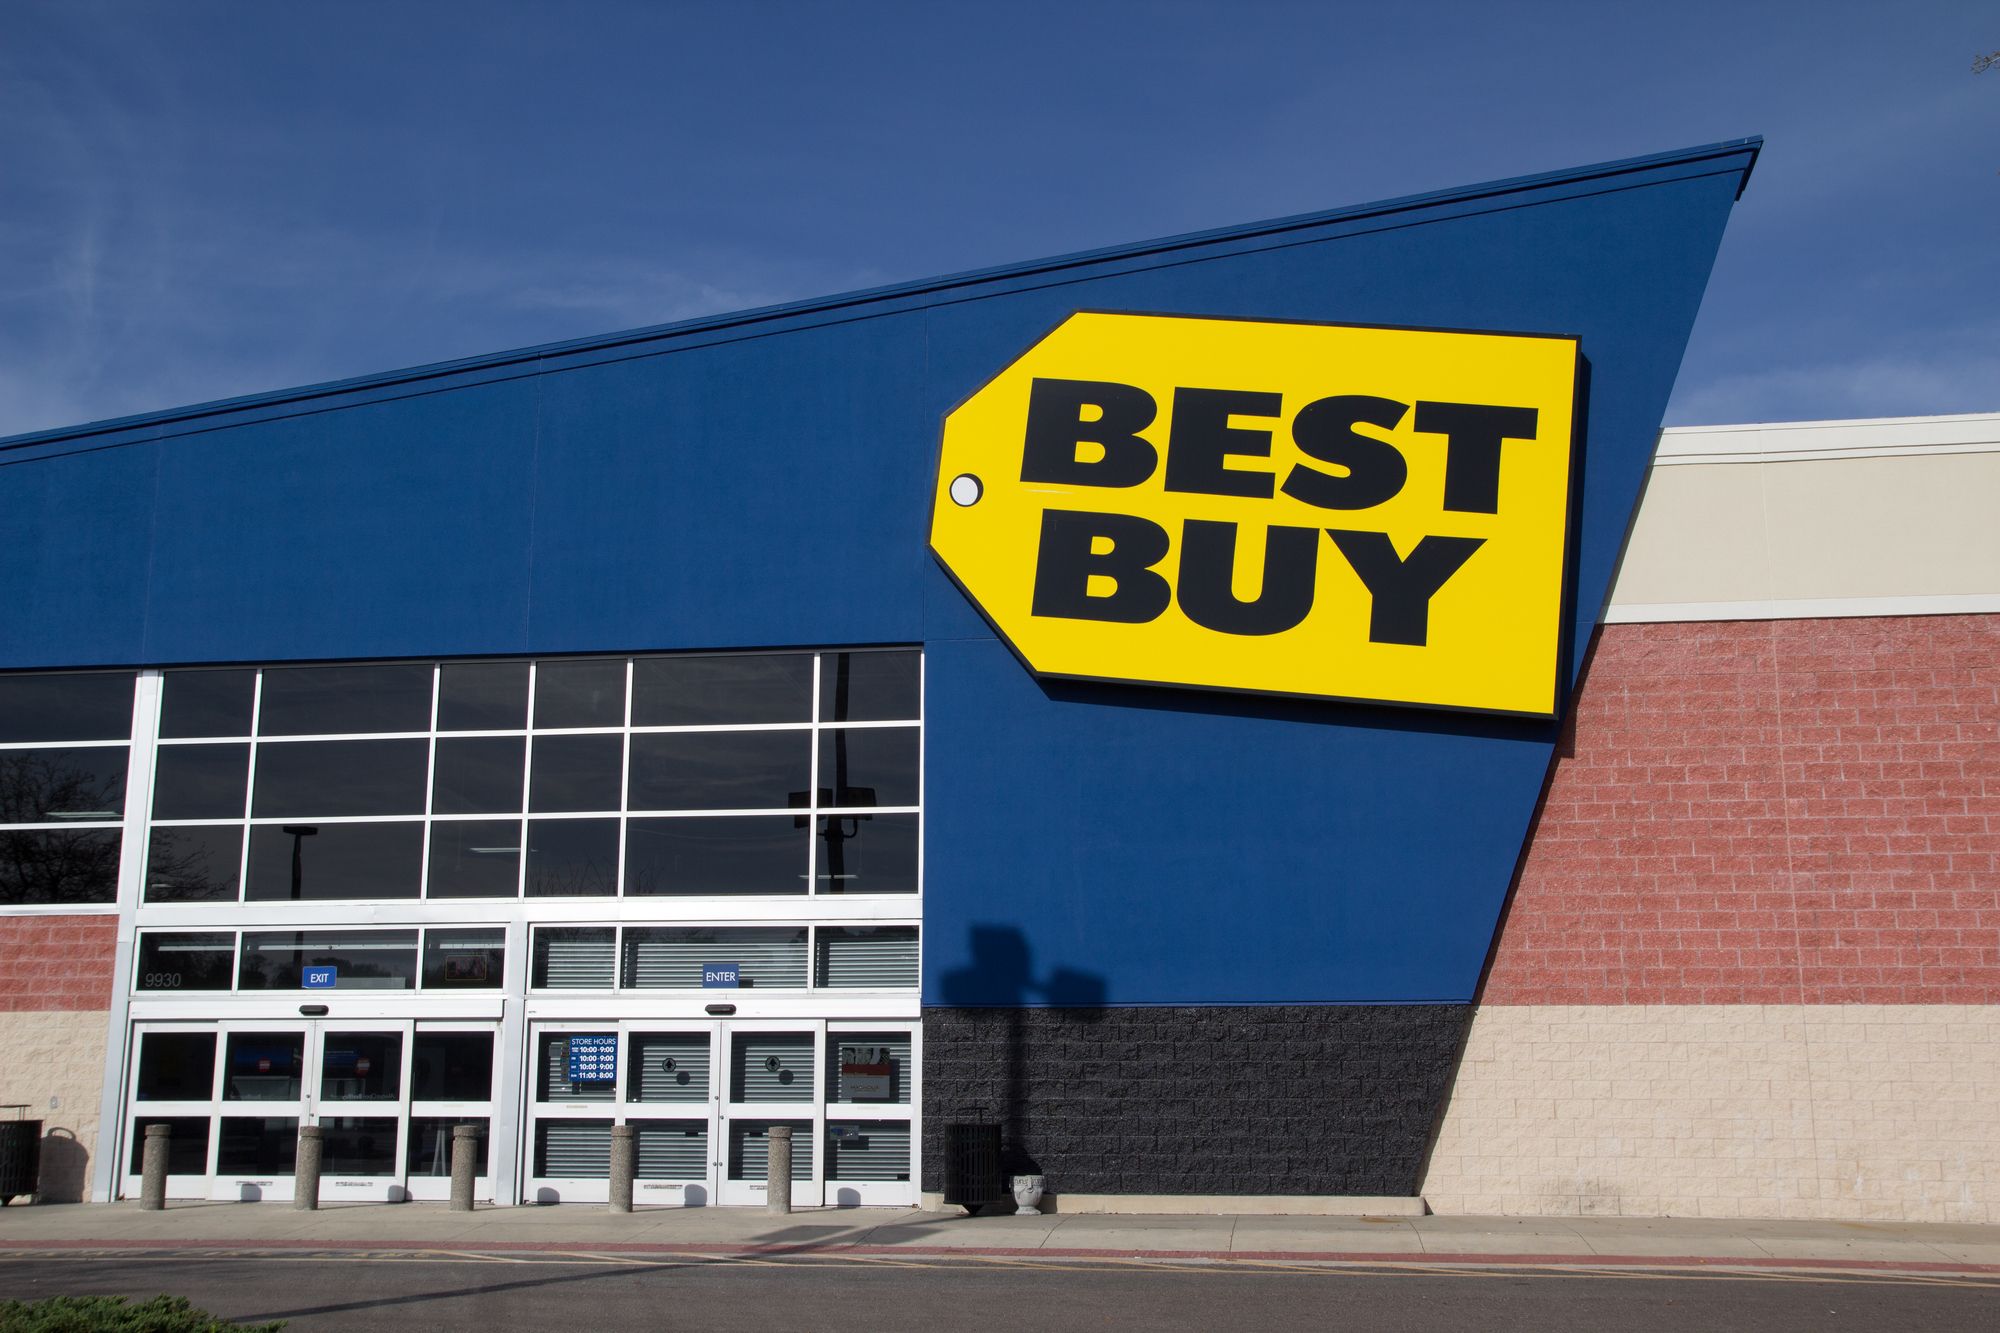 JACKSONVILLE, FL - MARCH 16, 2014: A Best Buy retail electronics store in Jacksonville. In 2013, Best Buy operated 1,056 Best Buy and 409 Best Buy Mobile stand-alone stores in the US.